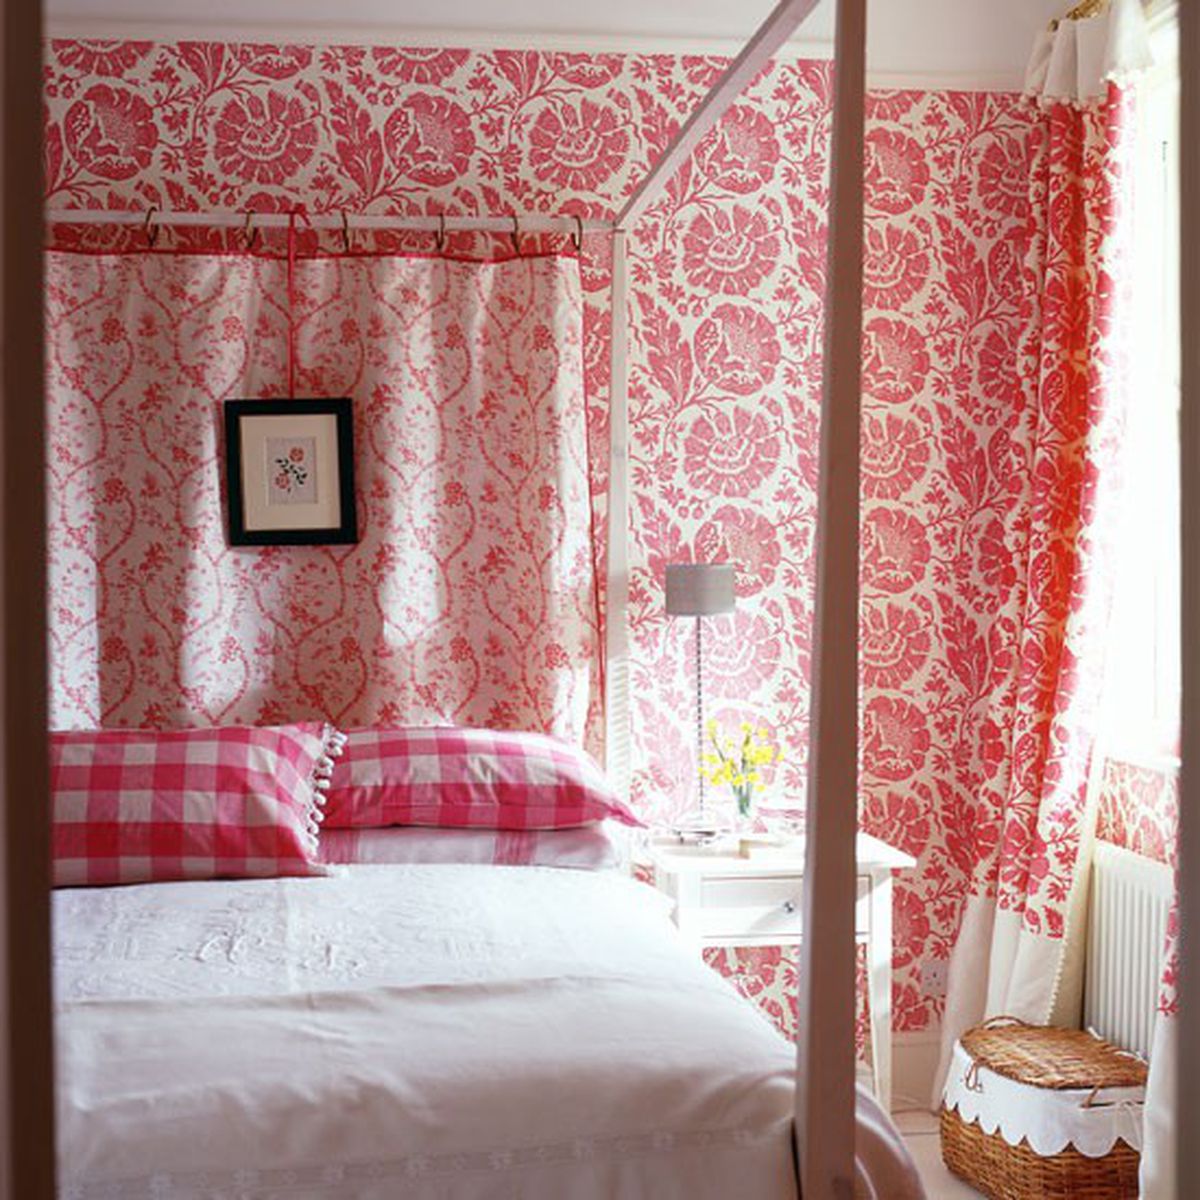 House Beautiful: Pretty in Pink